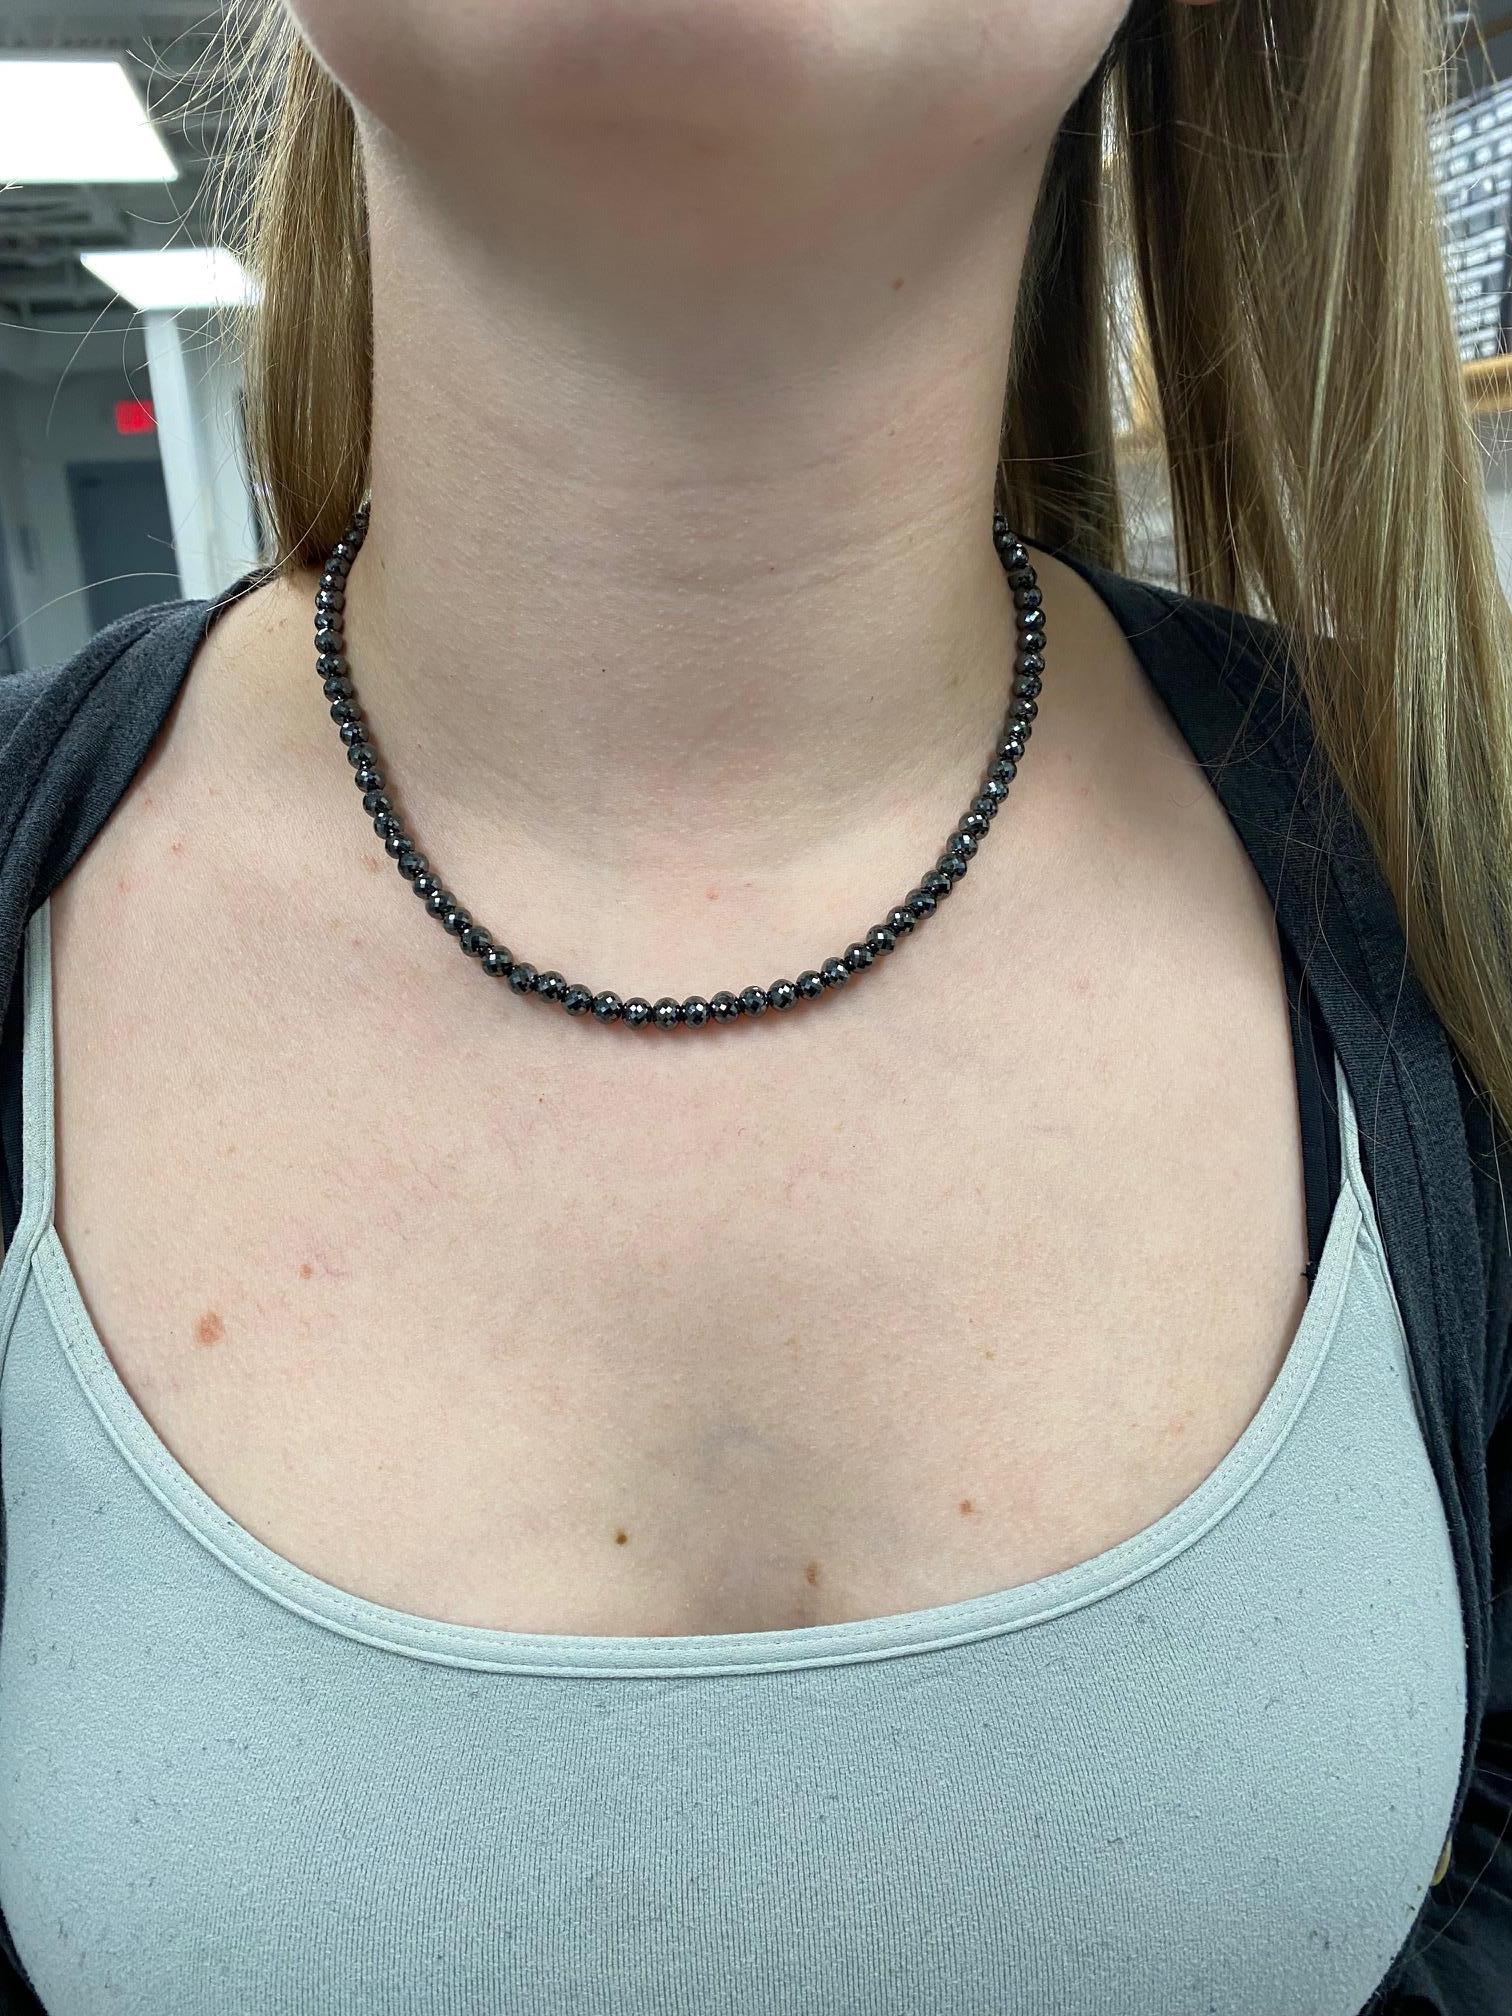 Bead 100.17 Carat Black Diamond Faceted Necklace with a White Gold Diamond Clasp For Sale